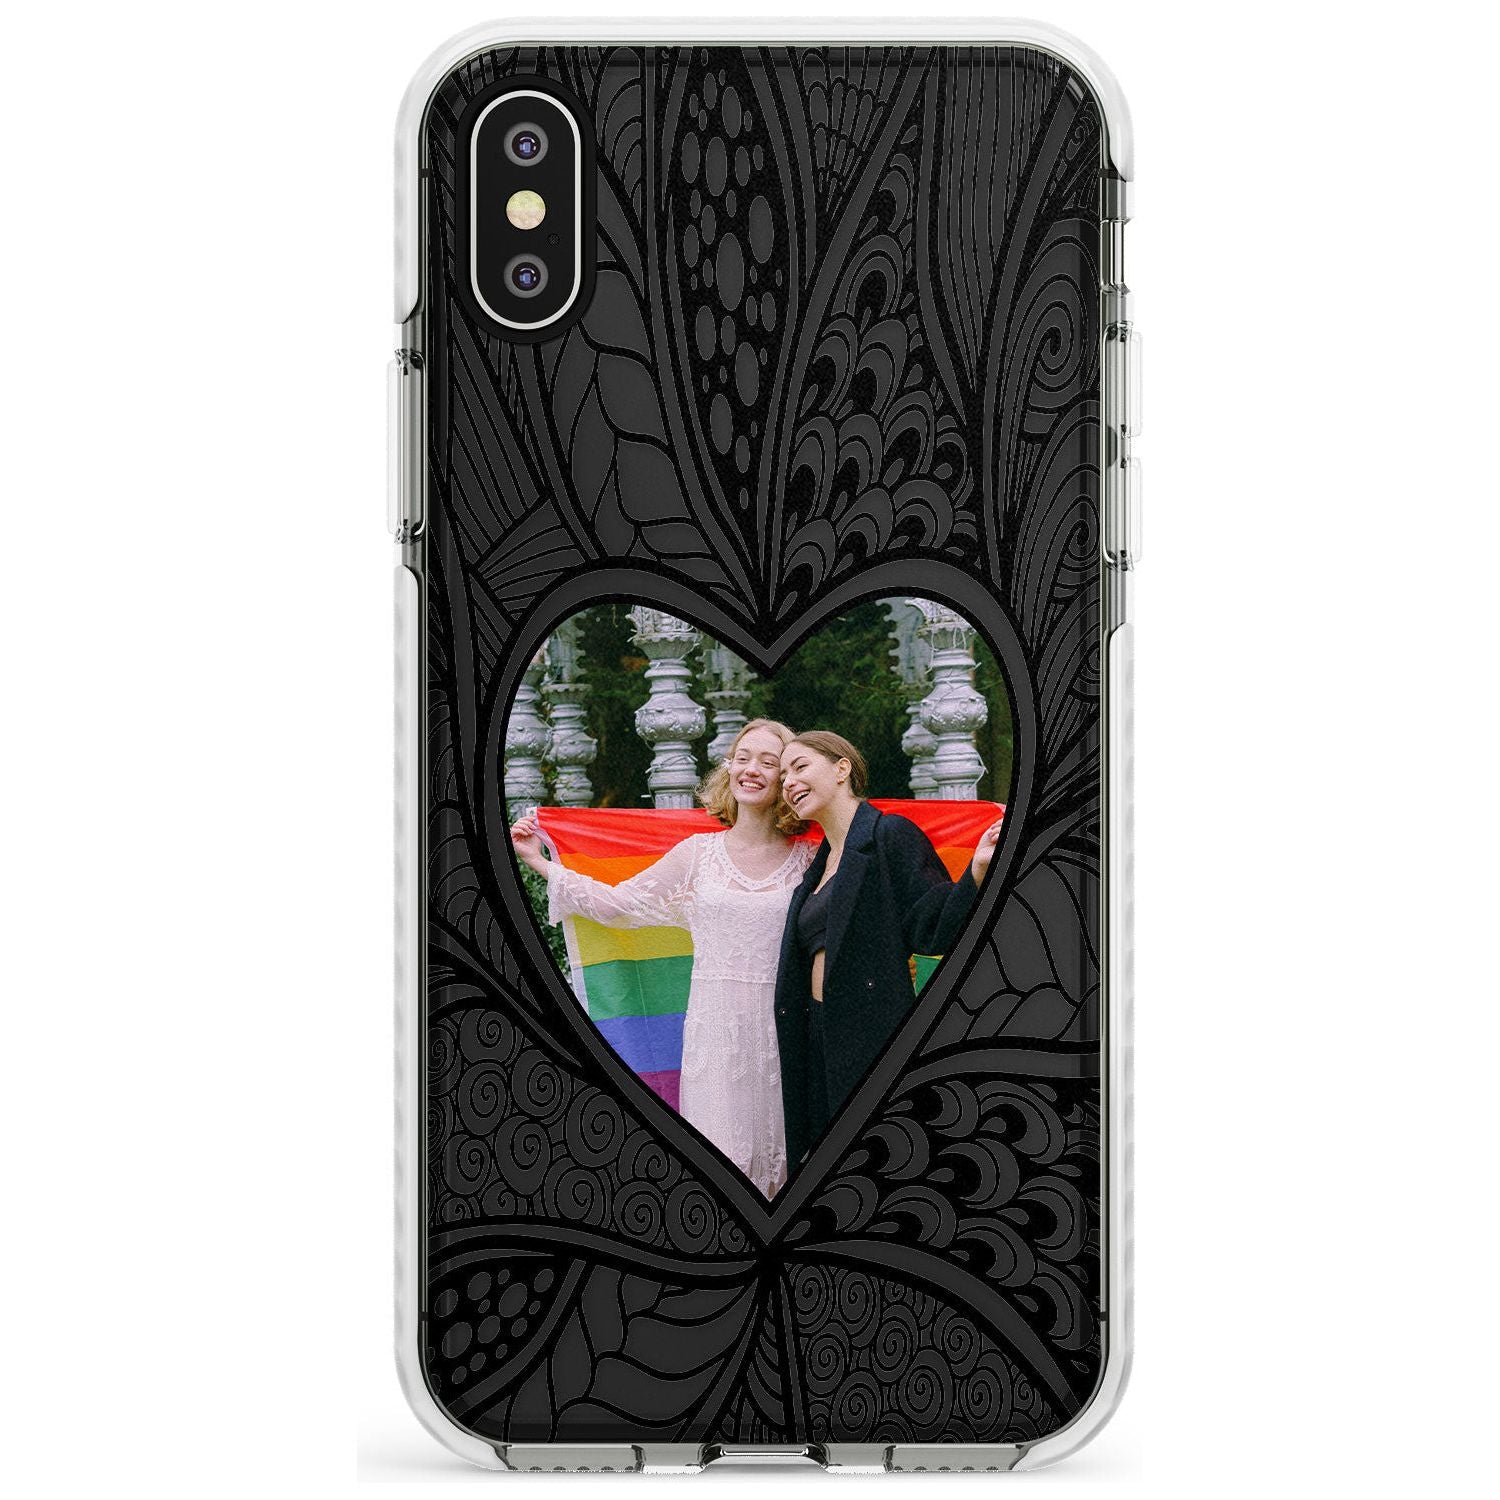 Personalised Henna Heart Photo Case Impact Phone Case for iPhone X XS Max XR